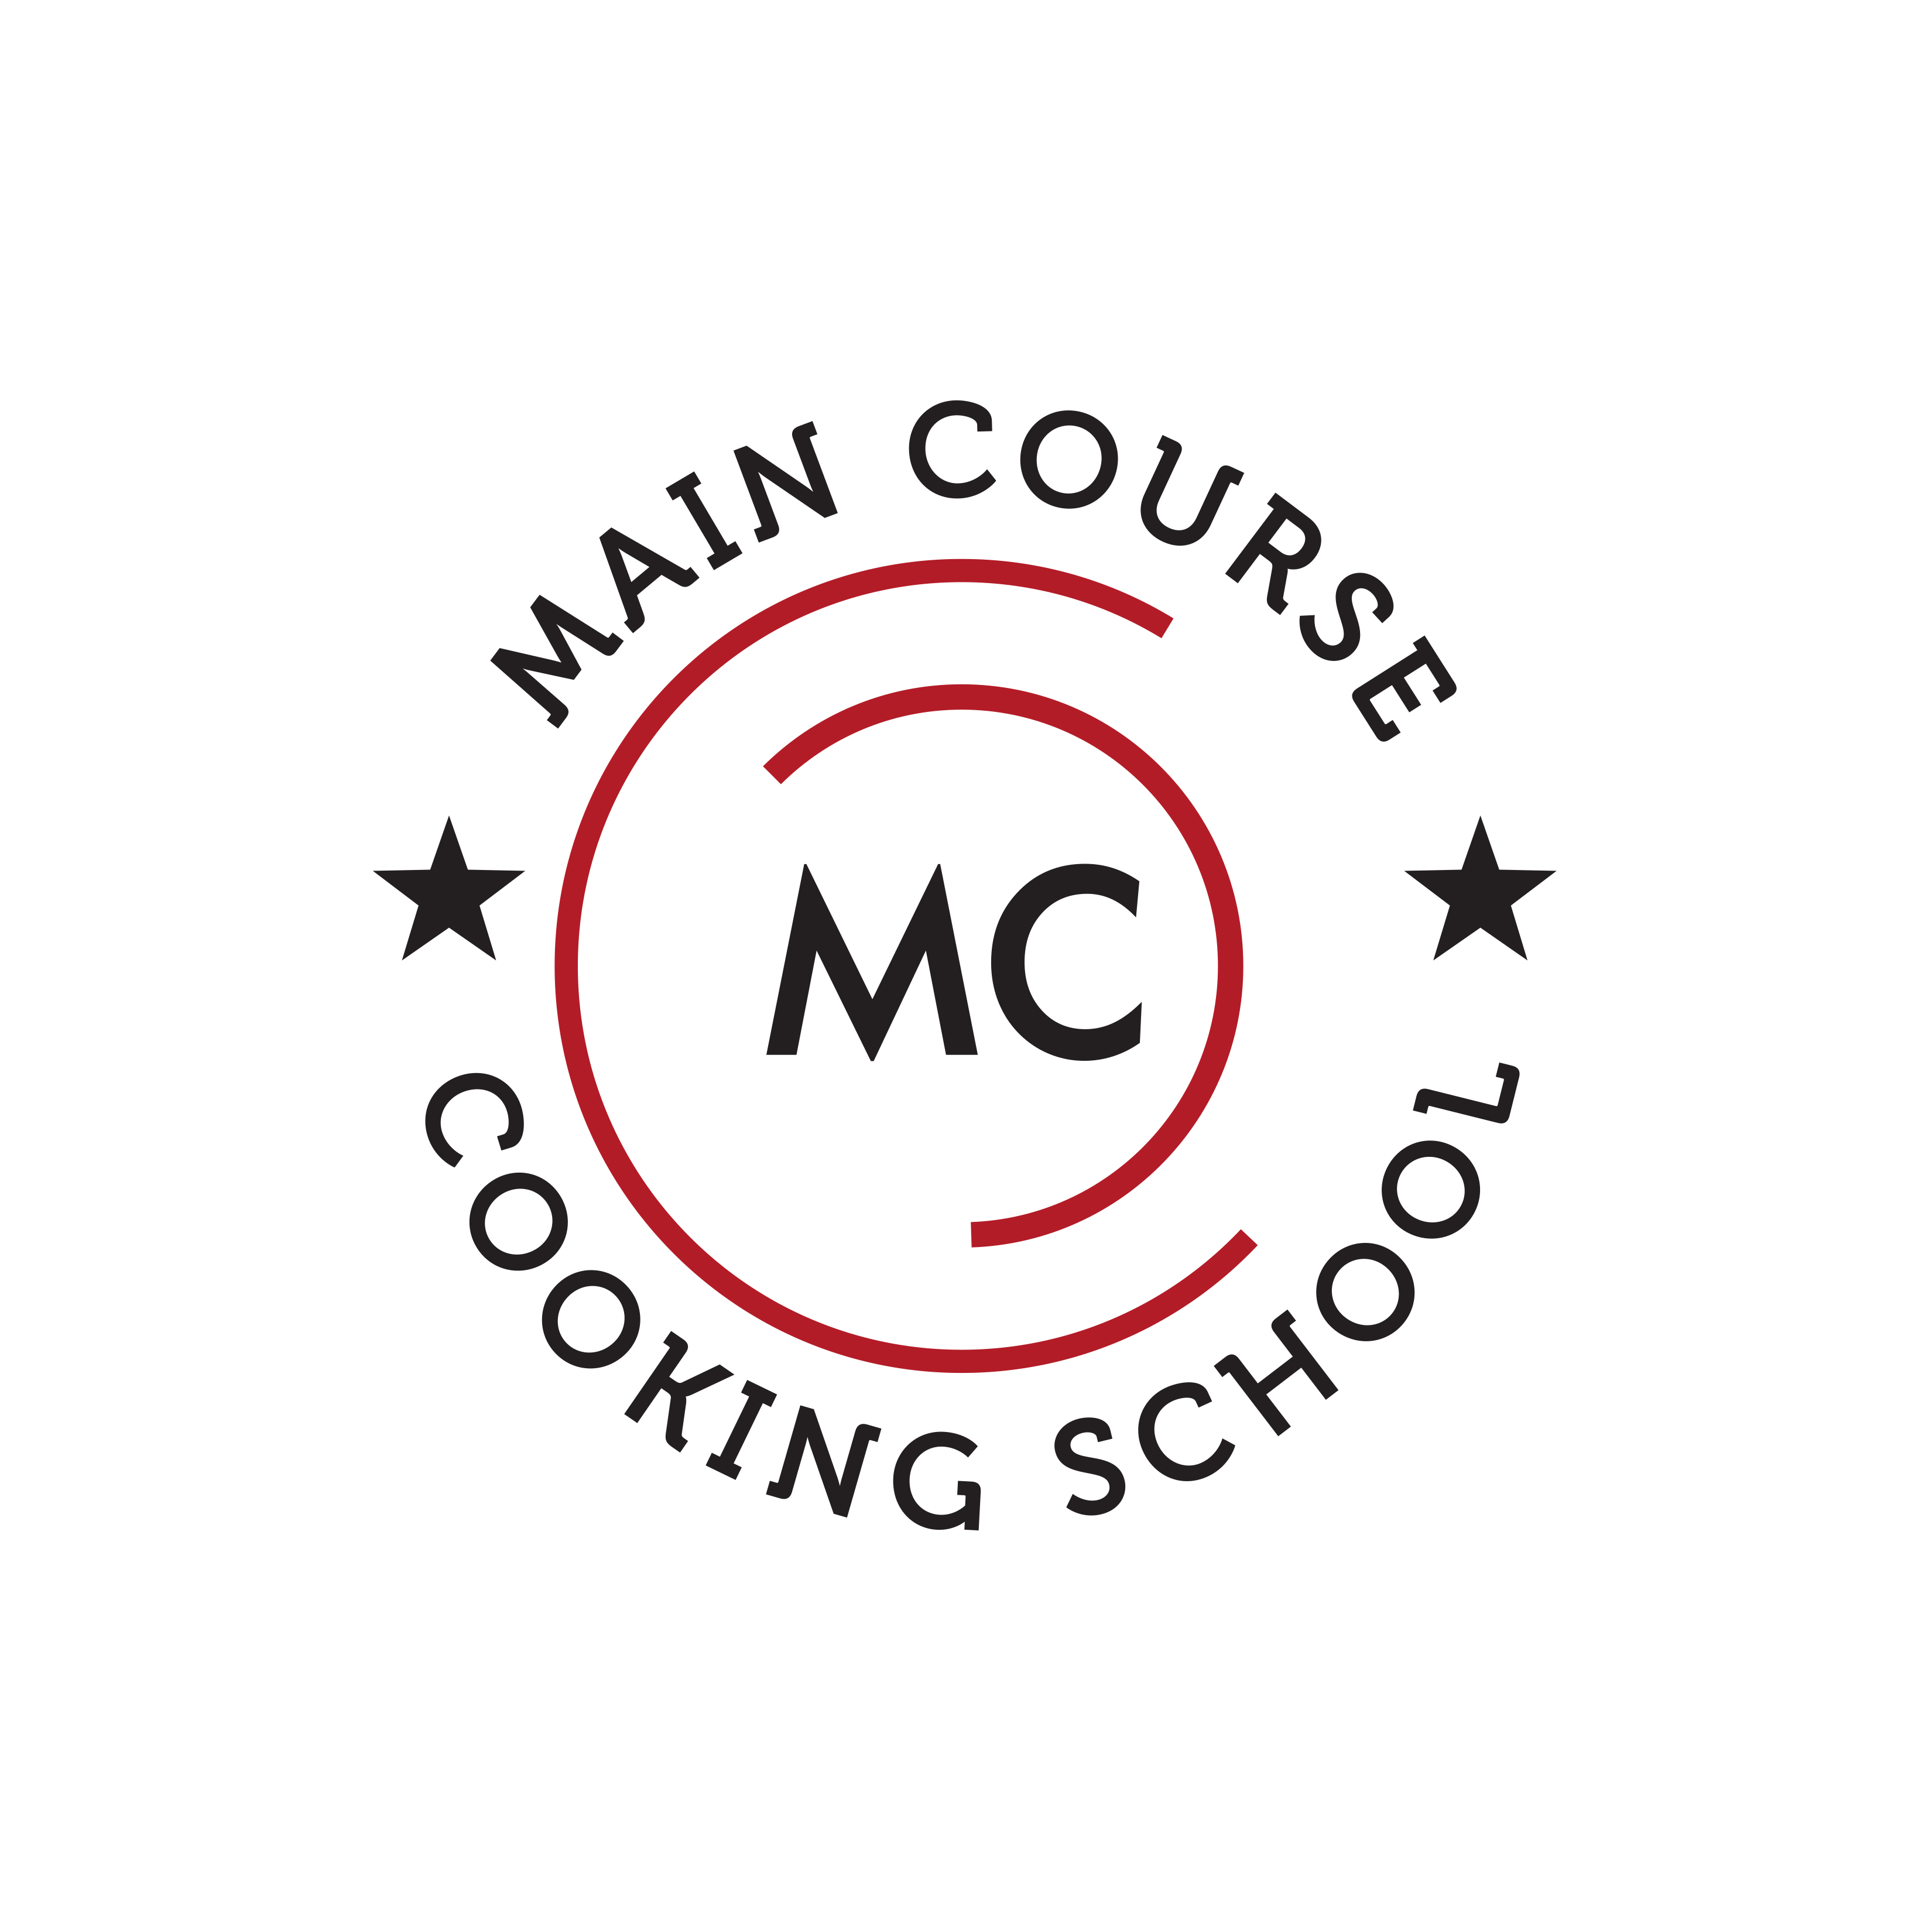 Main Course Cooking School Coupons near me in Spring ...